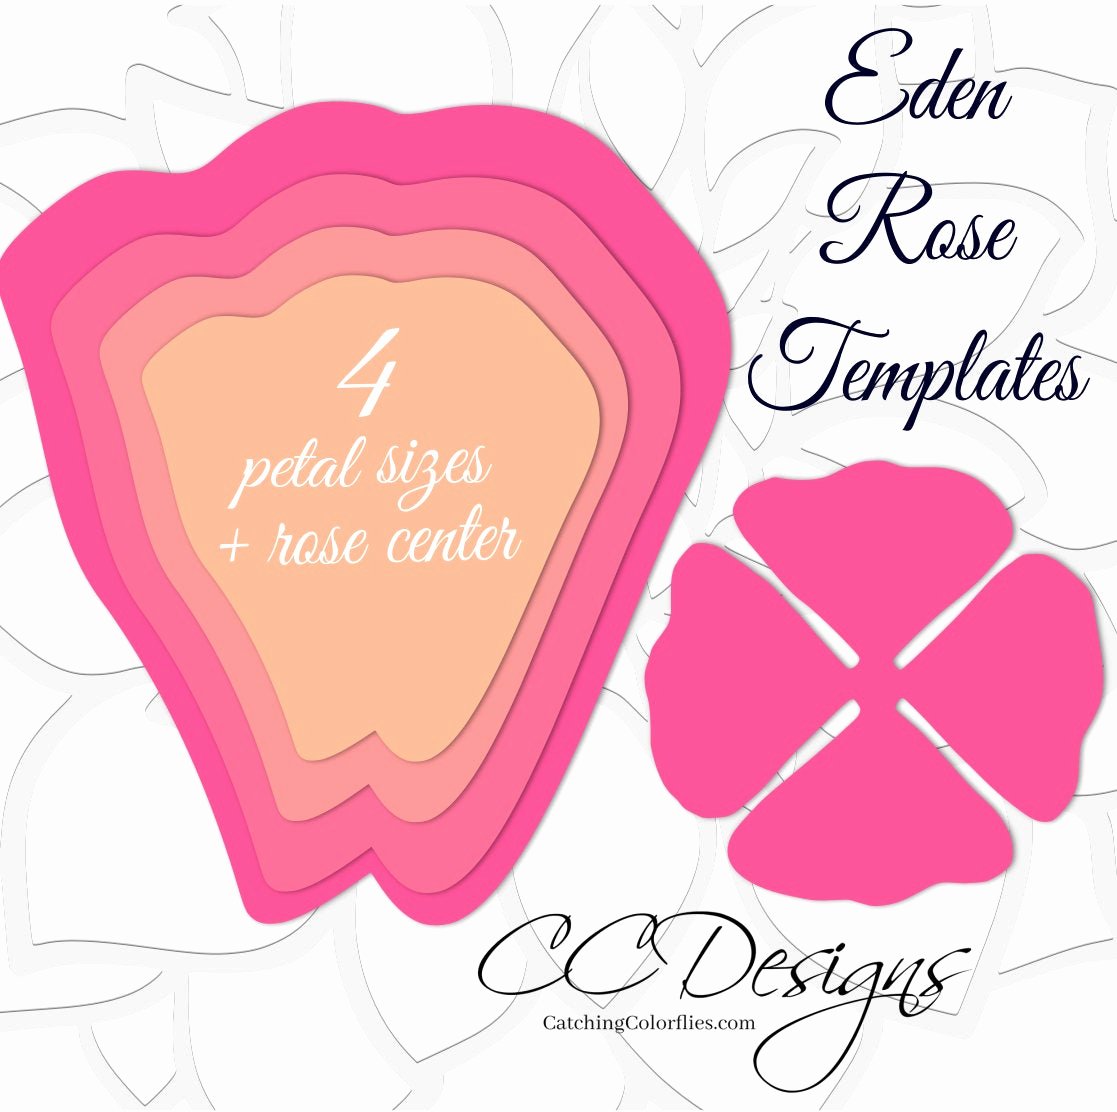 Giant Rose Template Best Of Giant Paper Rose Templates Easy Printable Pdf Rose Template